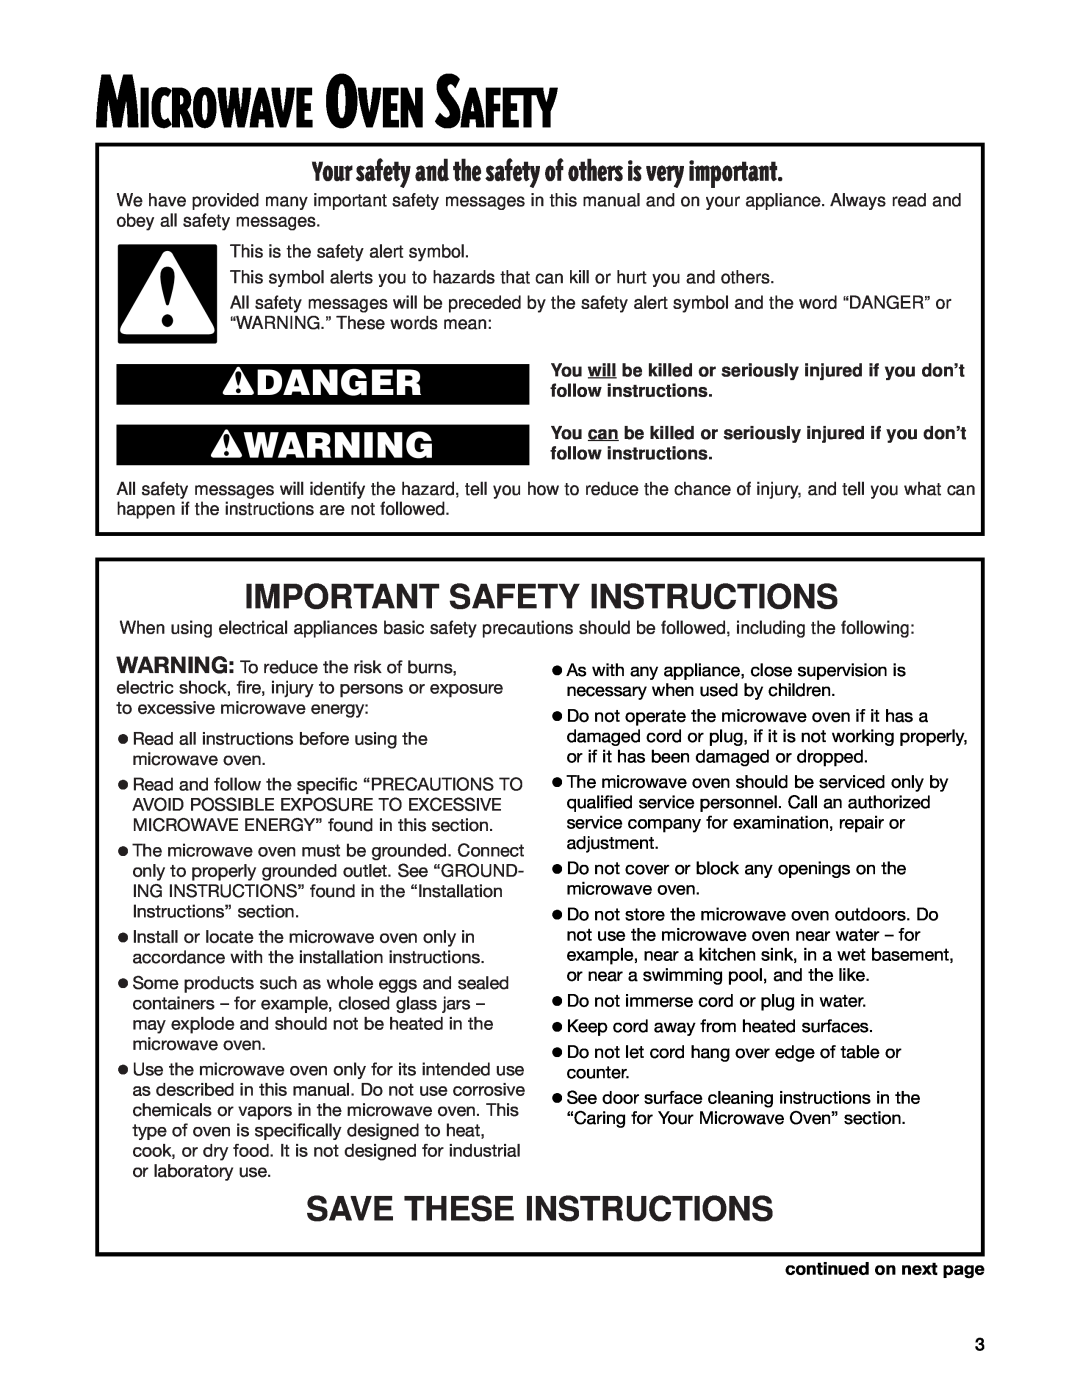 Whirlpool MT3185SH Microwave Oven Safety, wDANGER wWARNING, Important Safety Instructions, Save These Instructions 